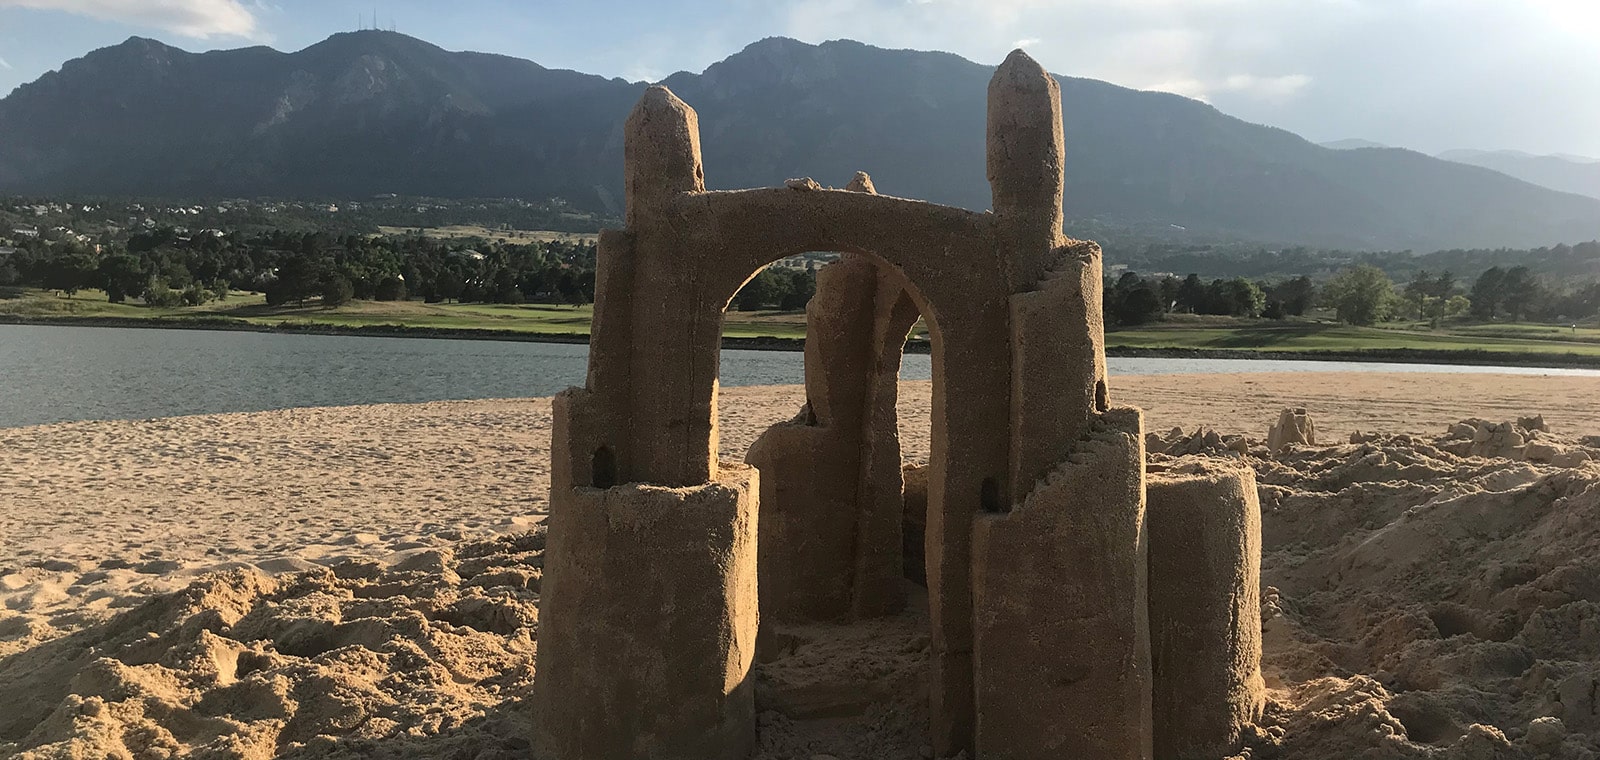 sandcastle by water's edge with mountains in background